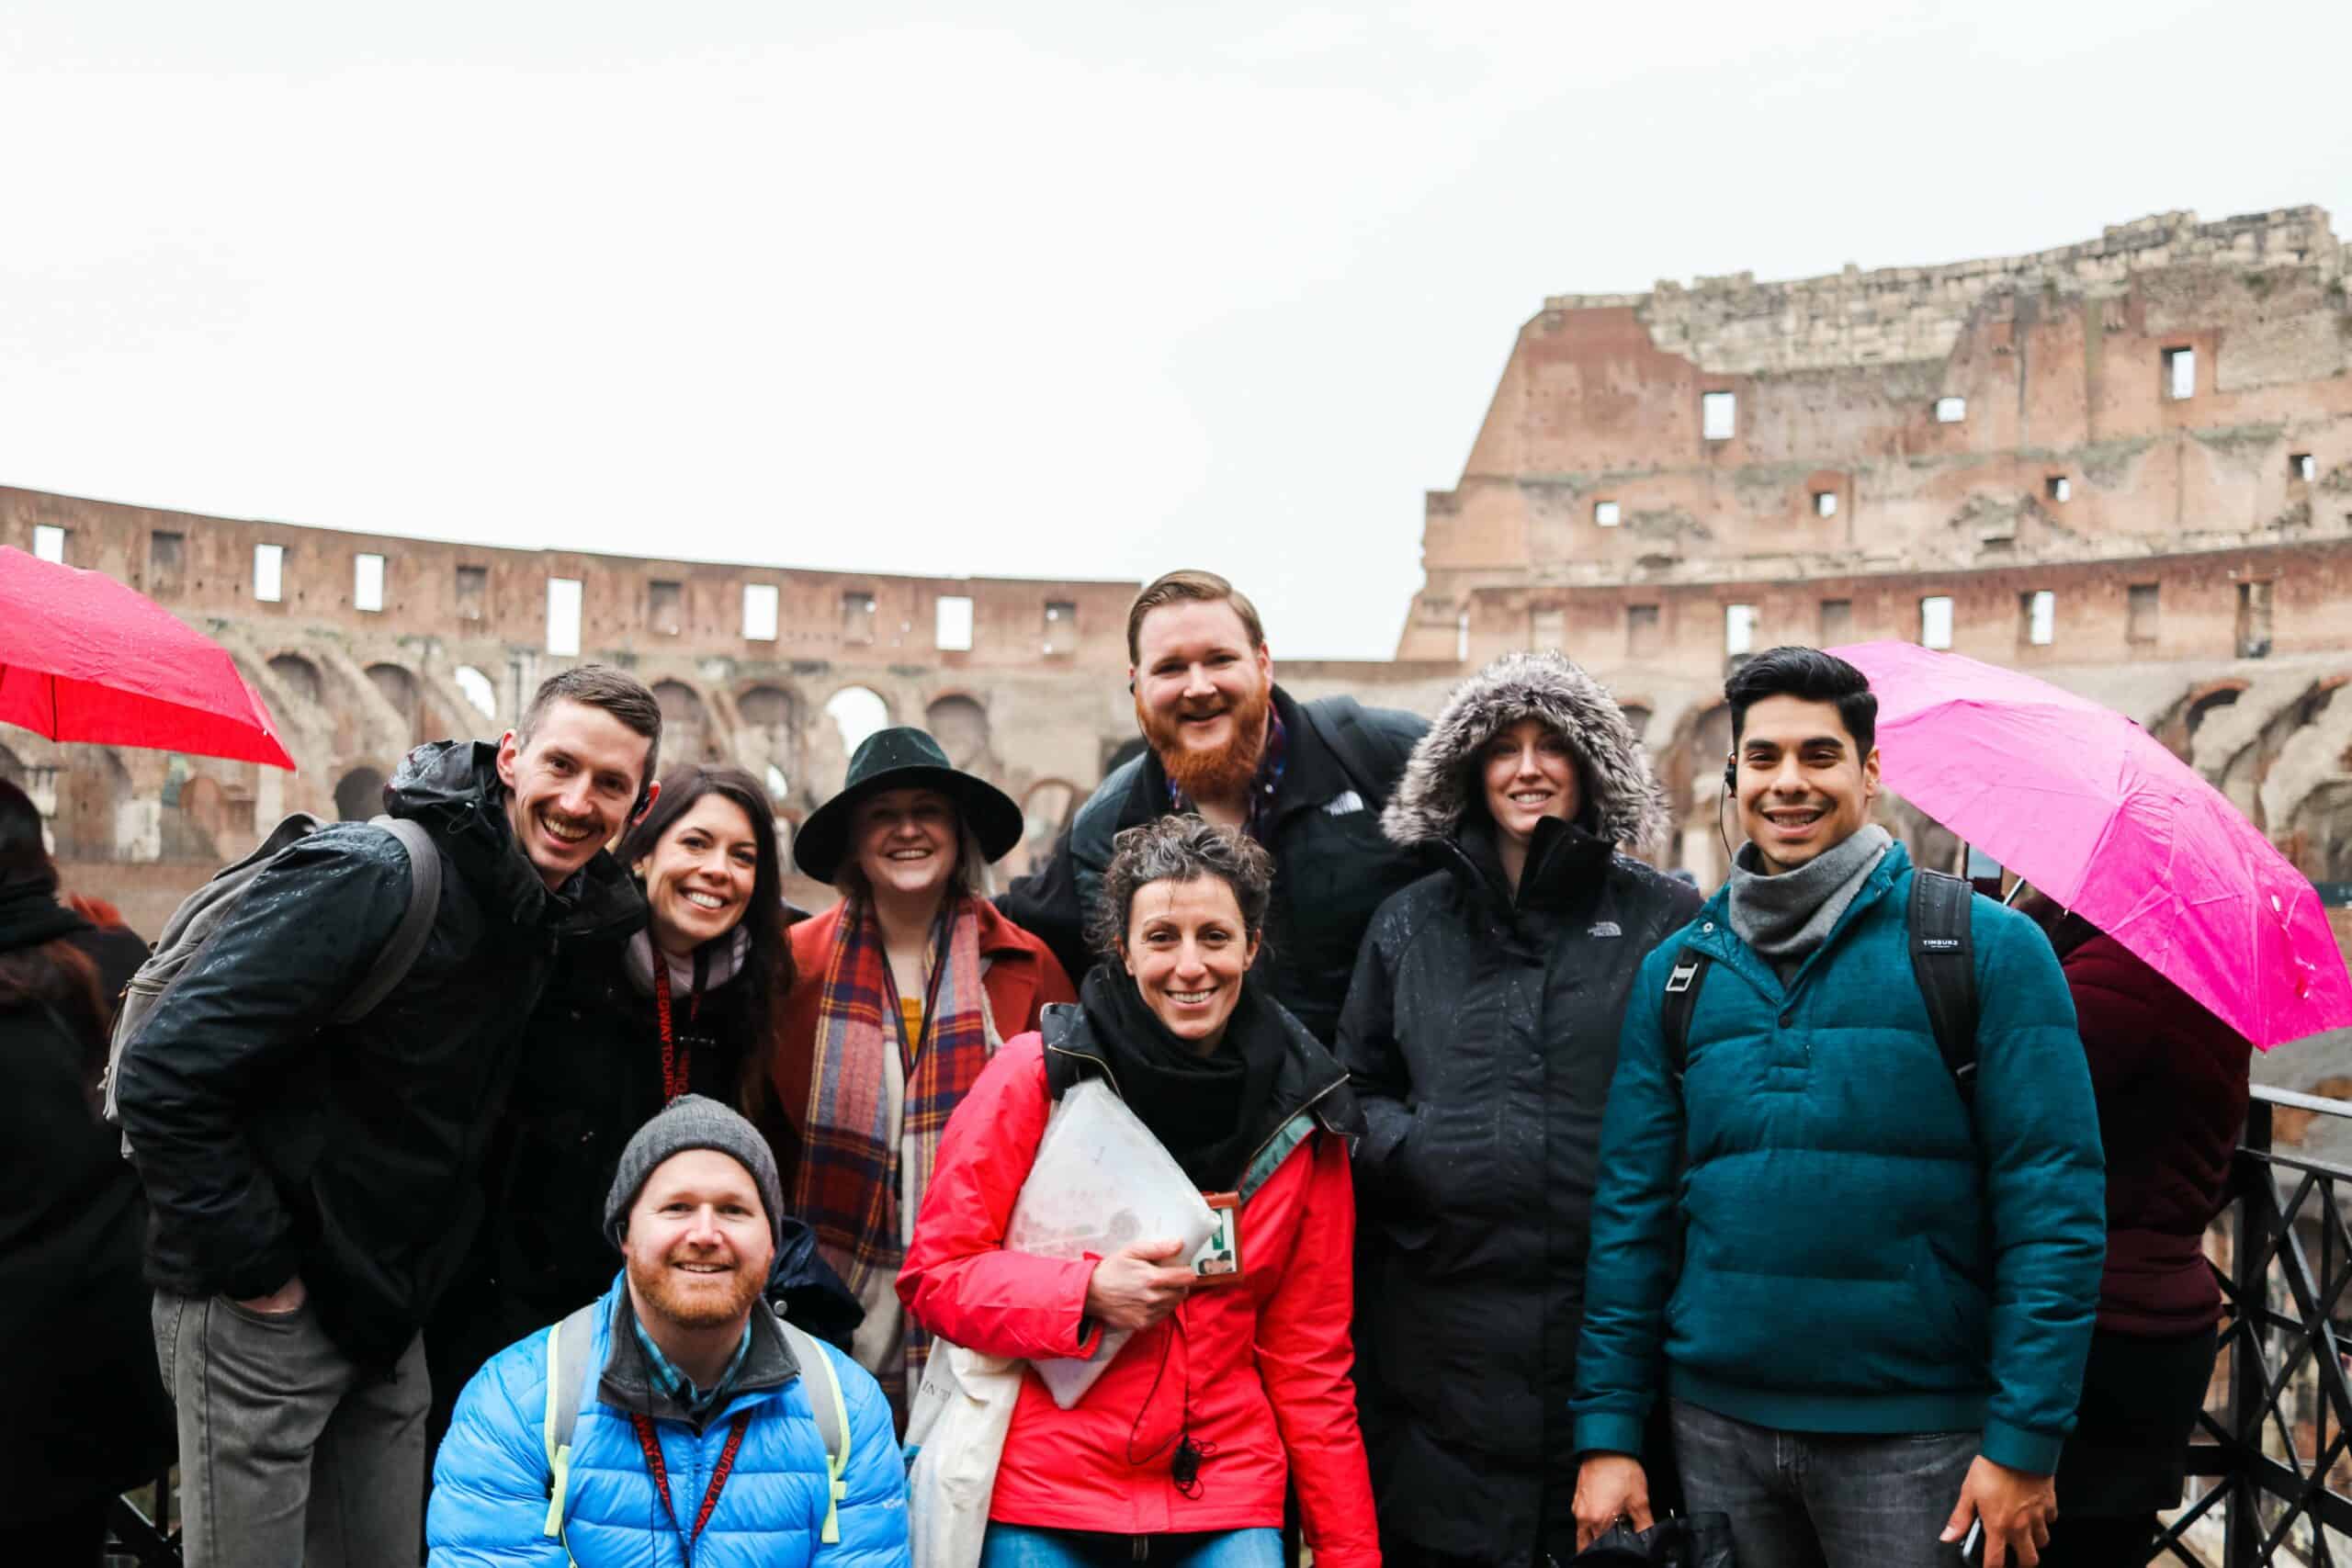 A group poses for a photo inside the Colosseum in Rome, Italy